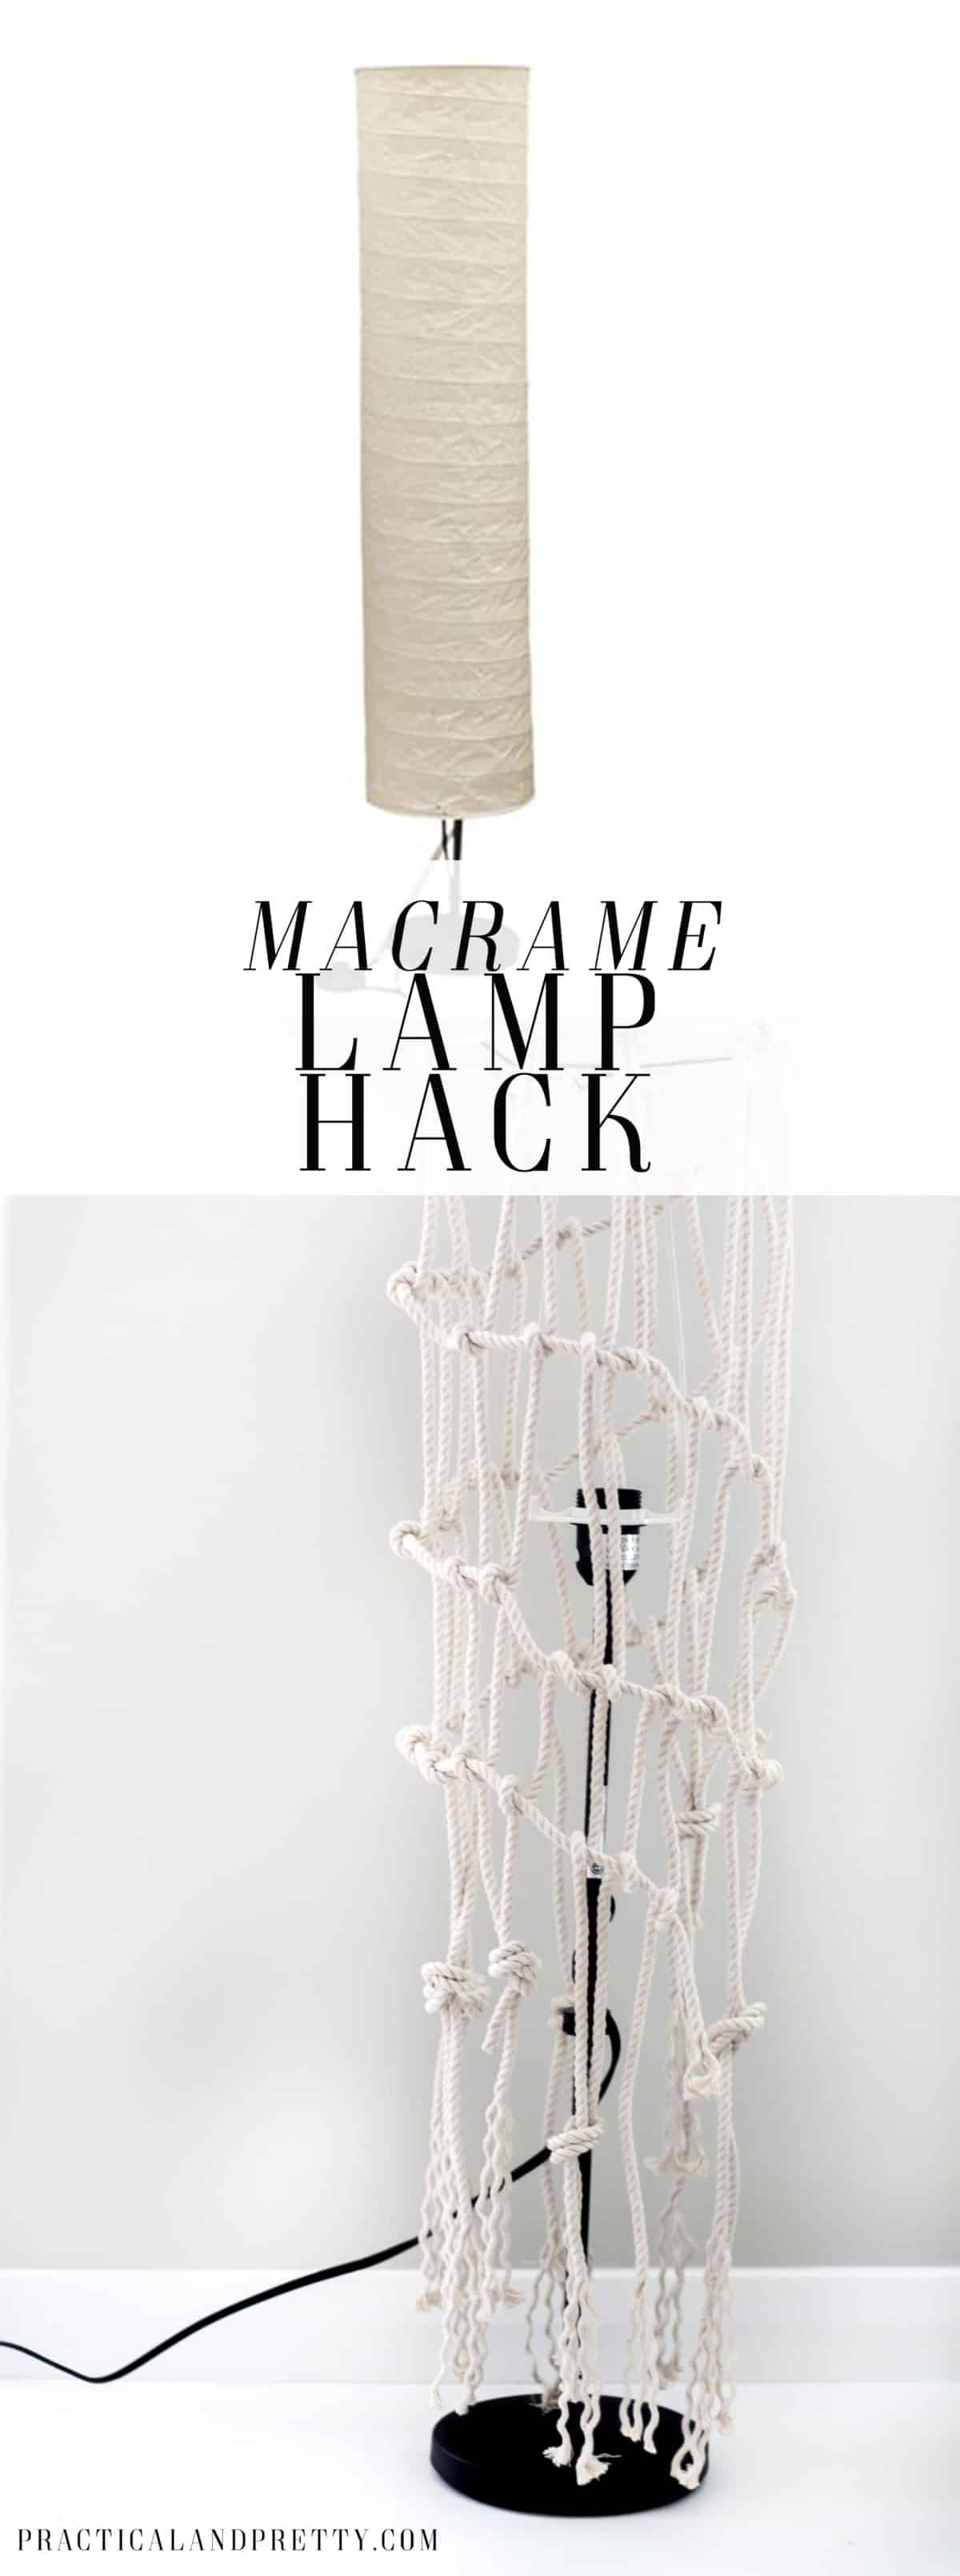 This macrame lamp hack was really pretty simple. The HOLMO lamp can look so boring. Maybe yours needs a little update too!